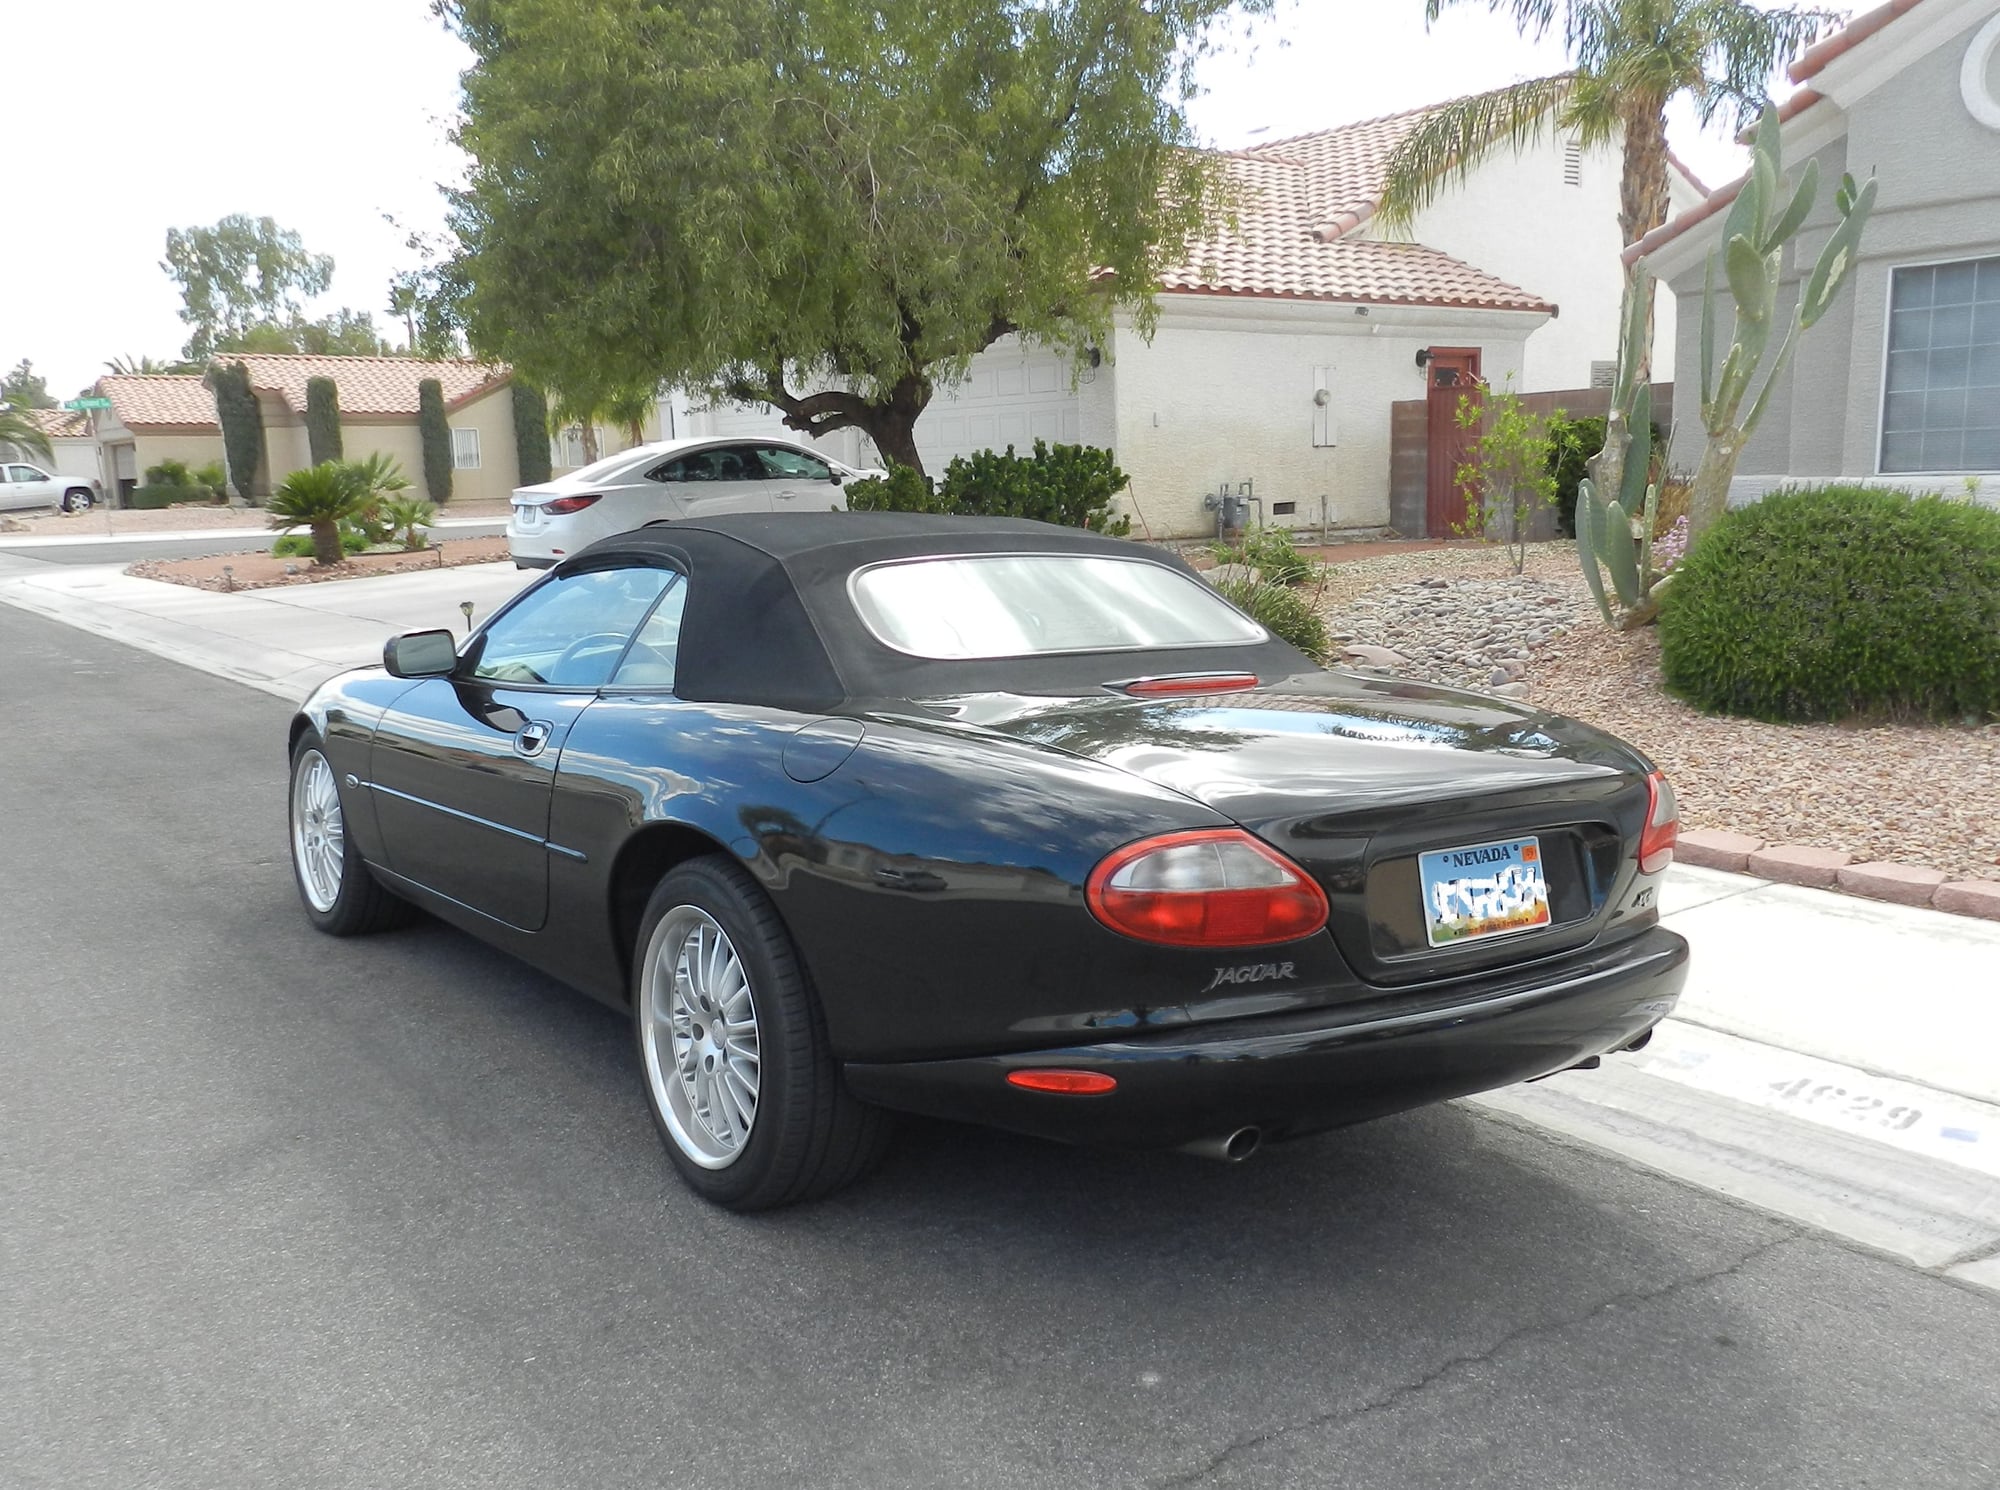 1998 Jaguar XK8 - XK8 Upgrades Are Done - Used - VIN SAJGX2244WC018659 - 95,500 Miles - 8 cyl - 2WD - Automatic - Convertible - Black - Las Vegas, NV 89130, United States